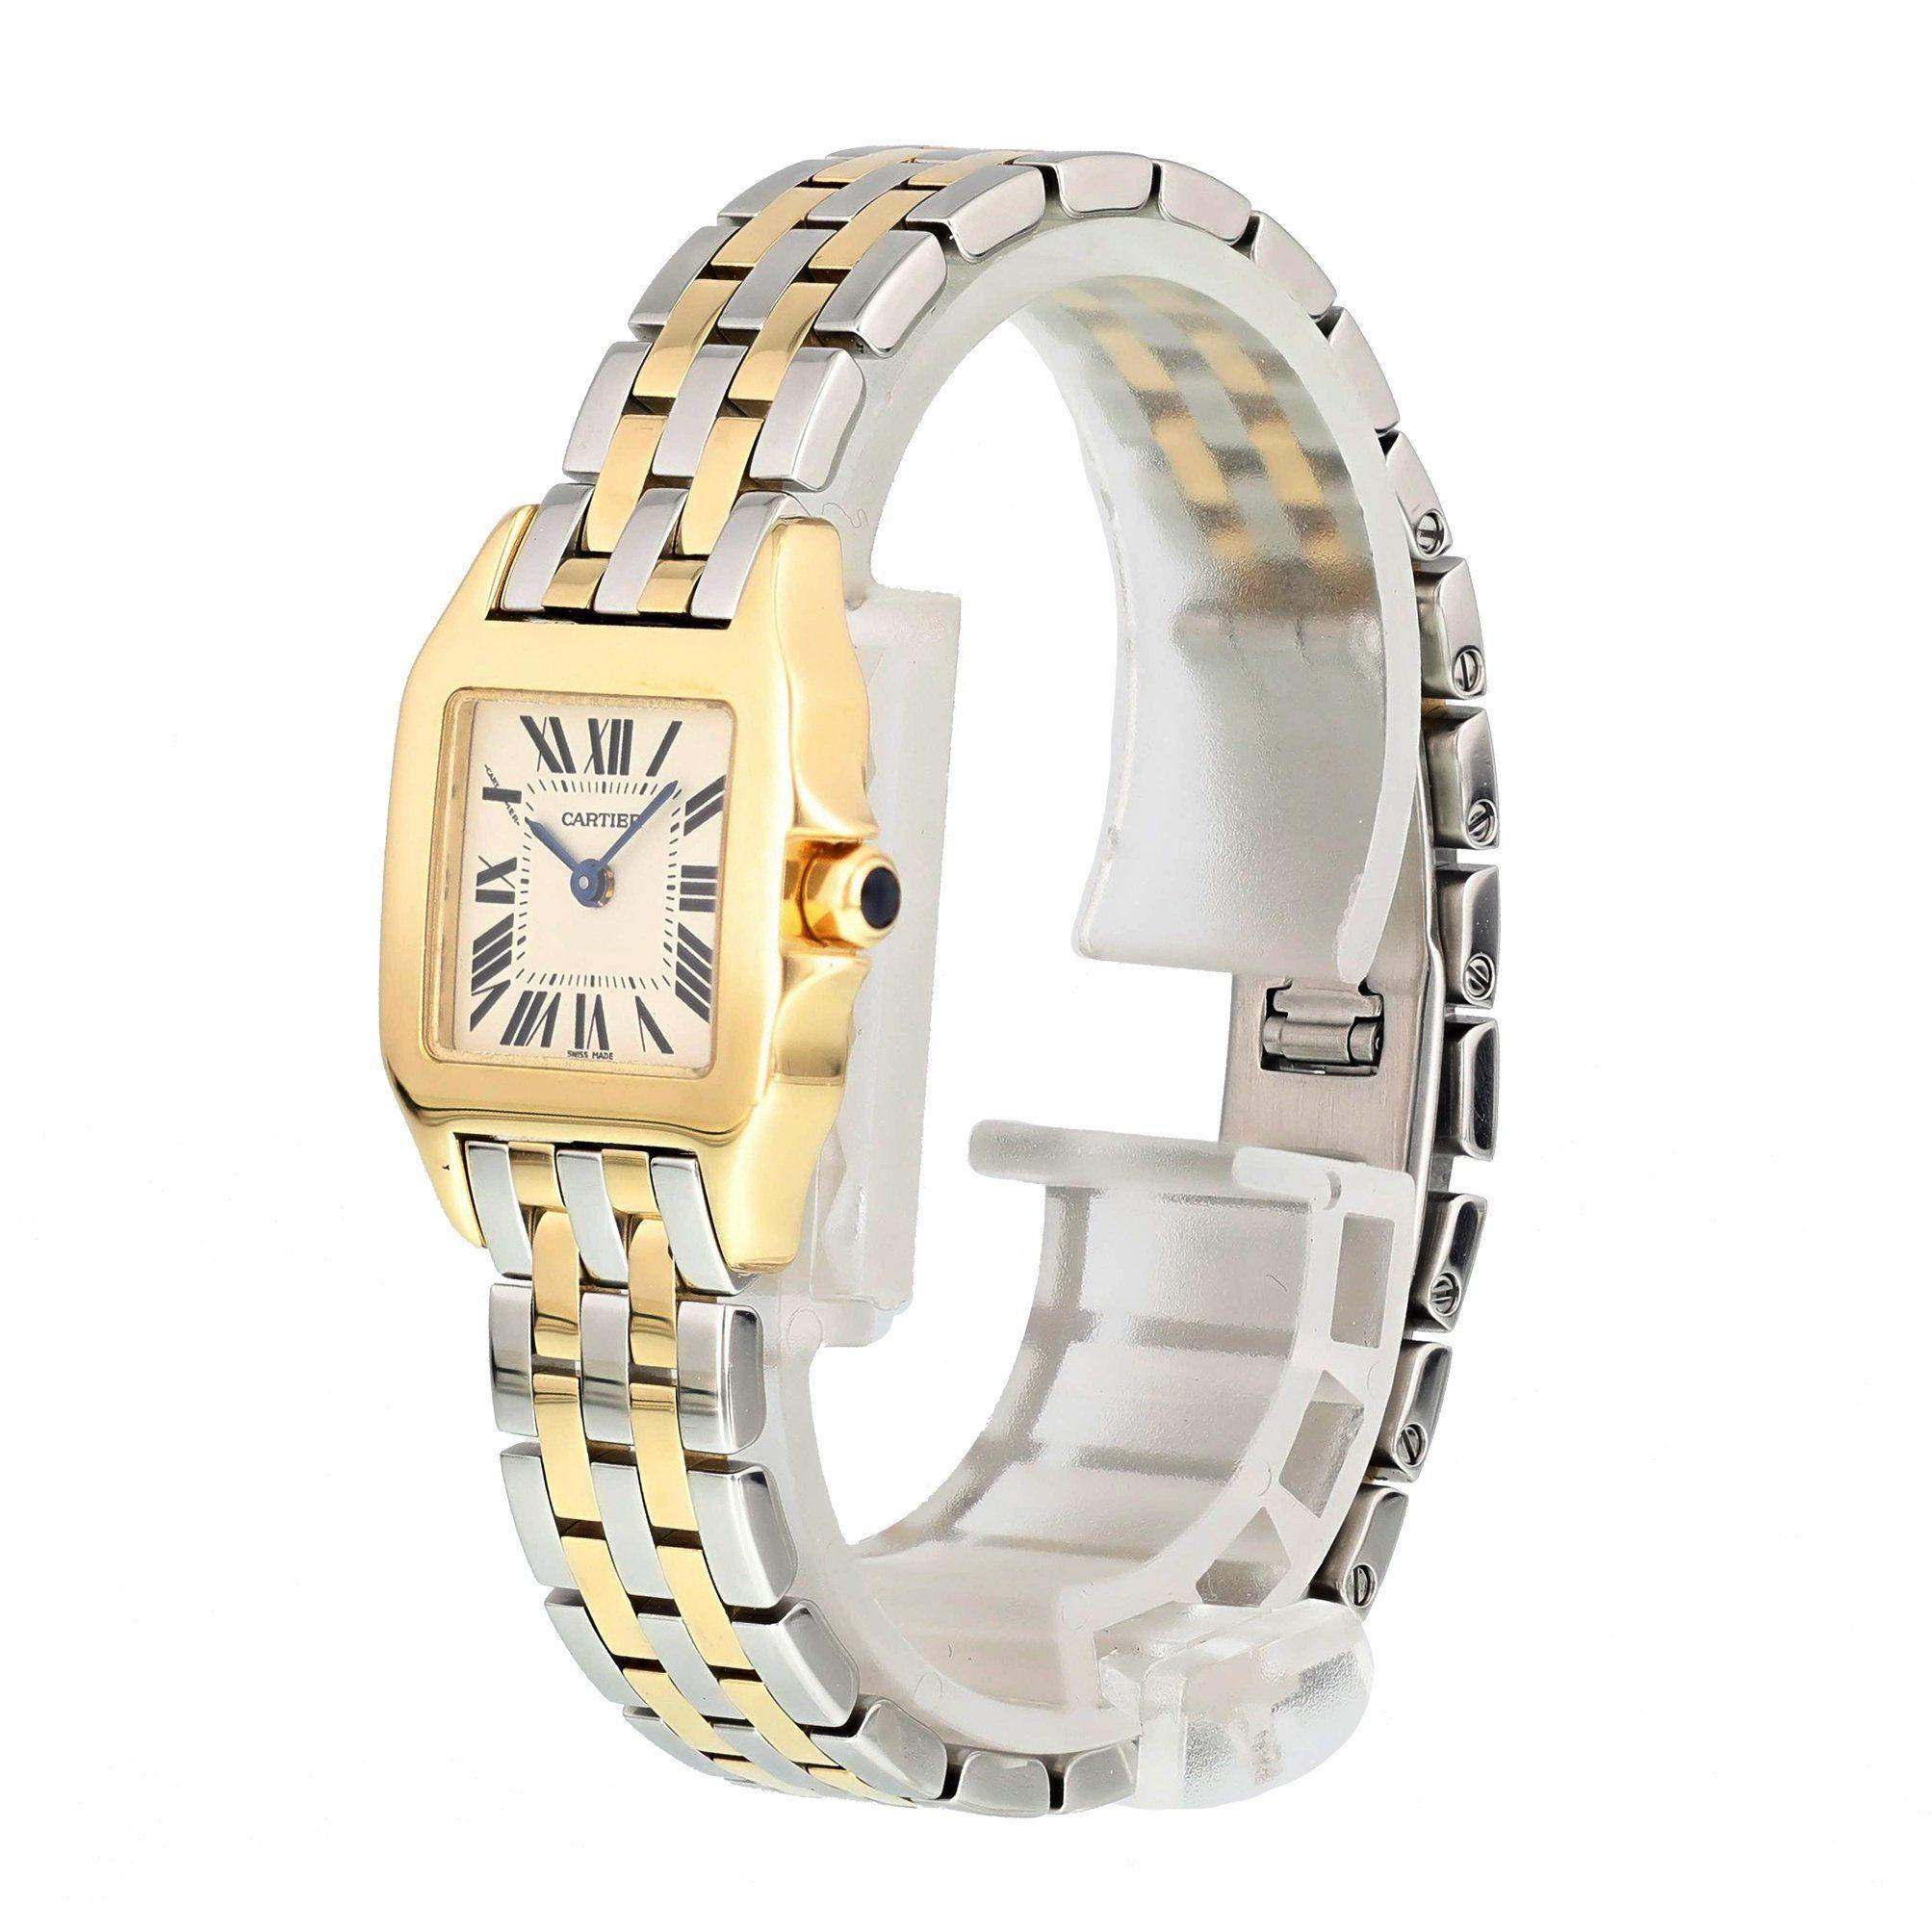 Cartier Santos Demoiselle 2699 Ladies Watch In Excellent Condition For Sale In New York, NY